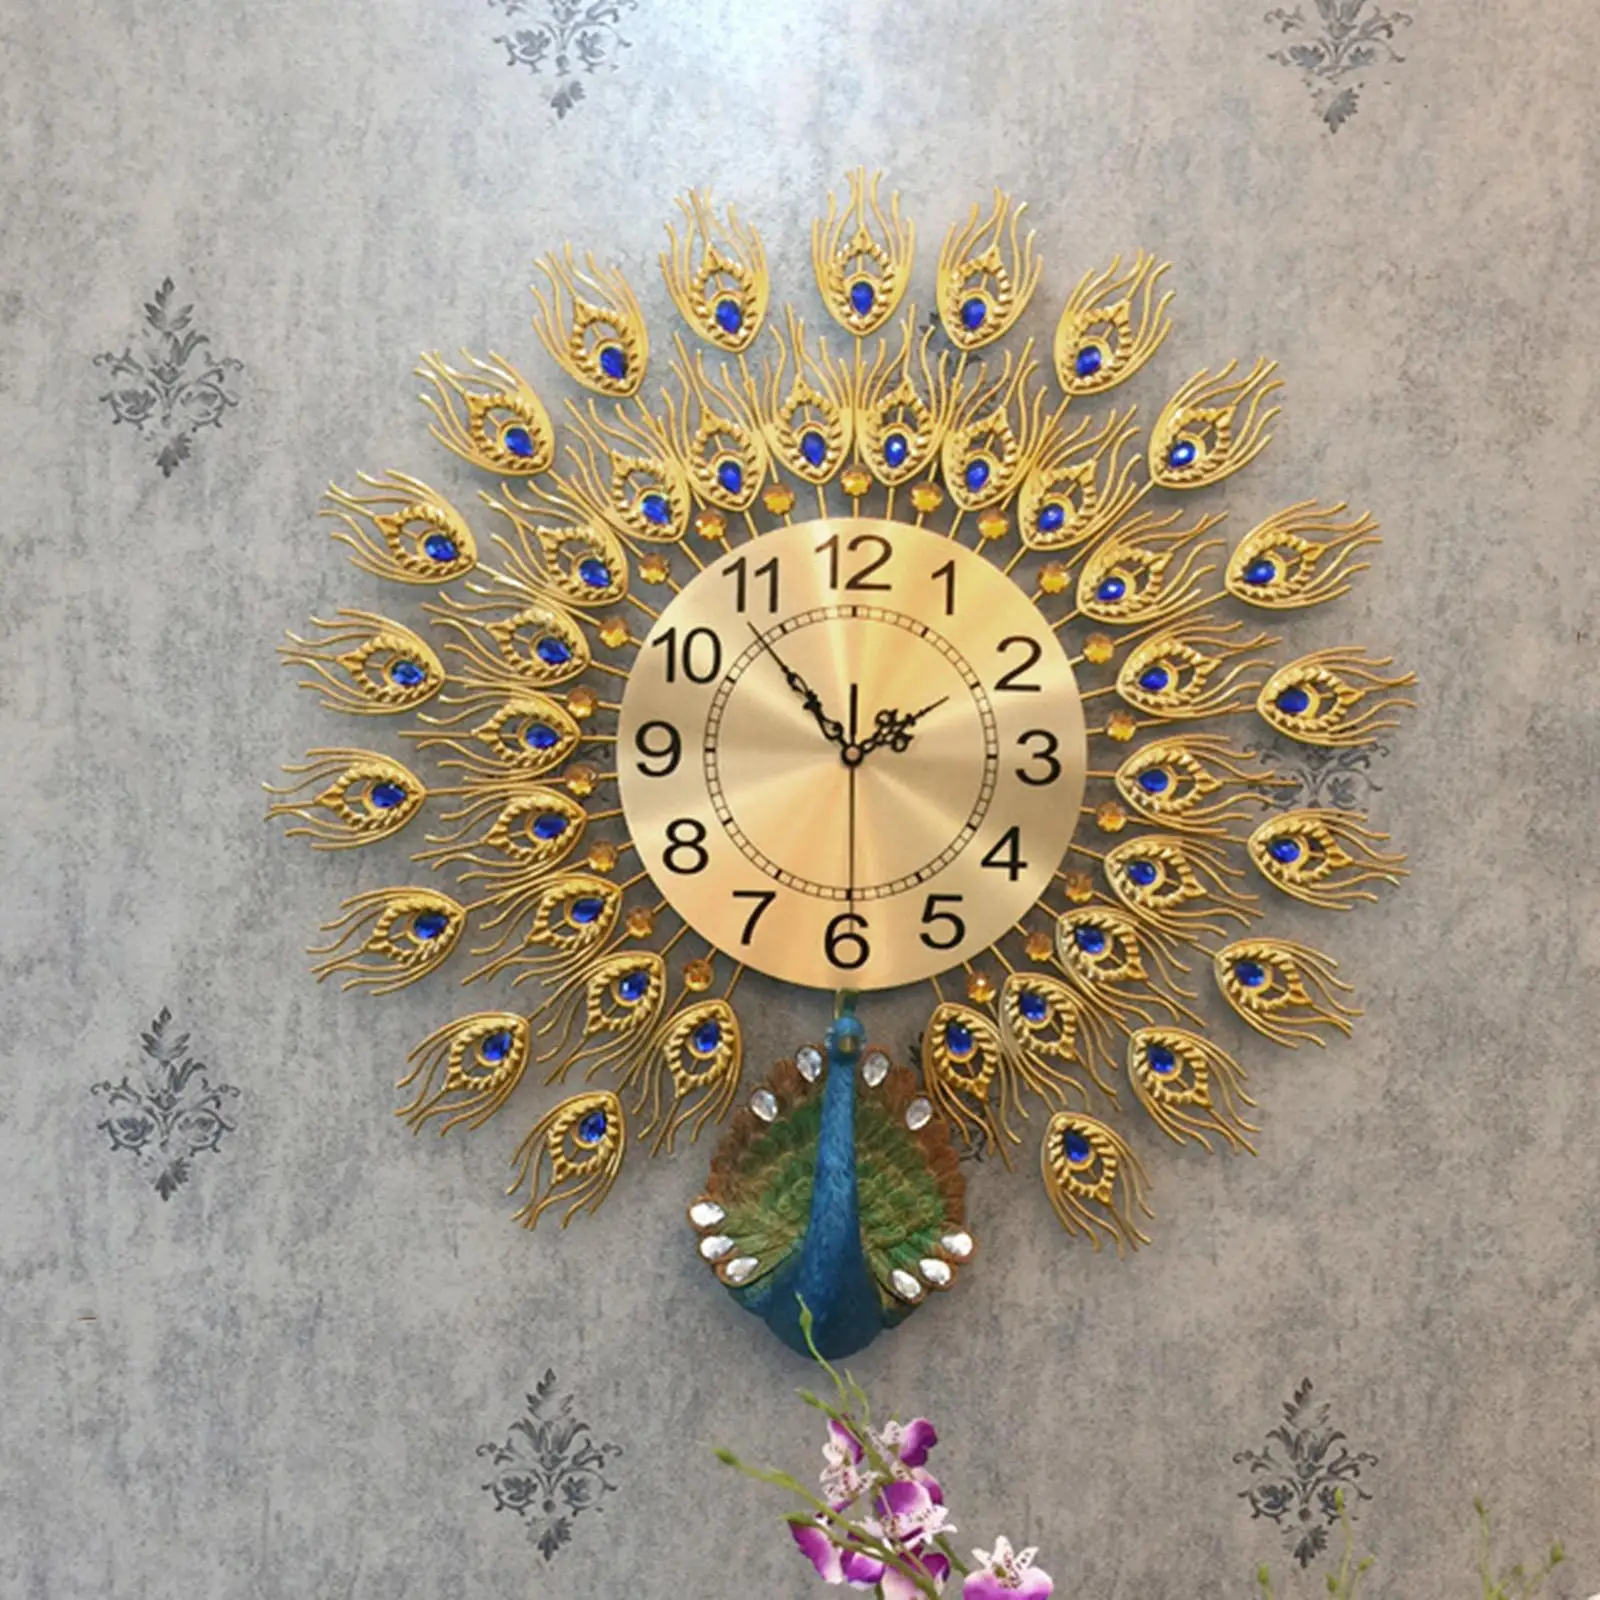 Wall Clock Hanging Clock Elegant Decorative Metal Watch Crafts Silent Ornament Colorful for Wall Decor Office Kitchen Bathroom